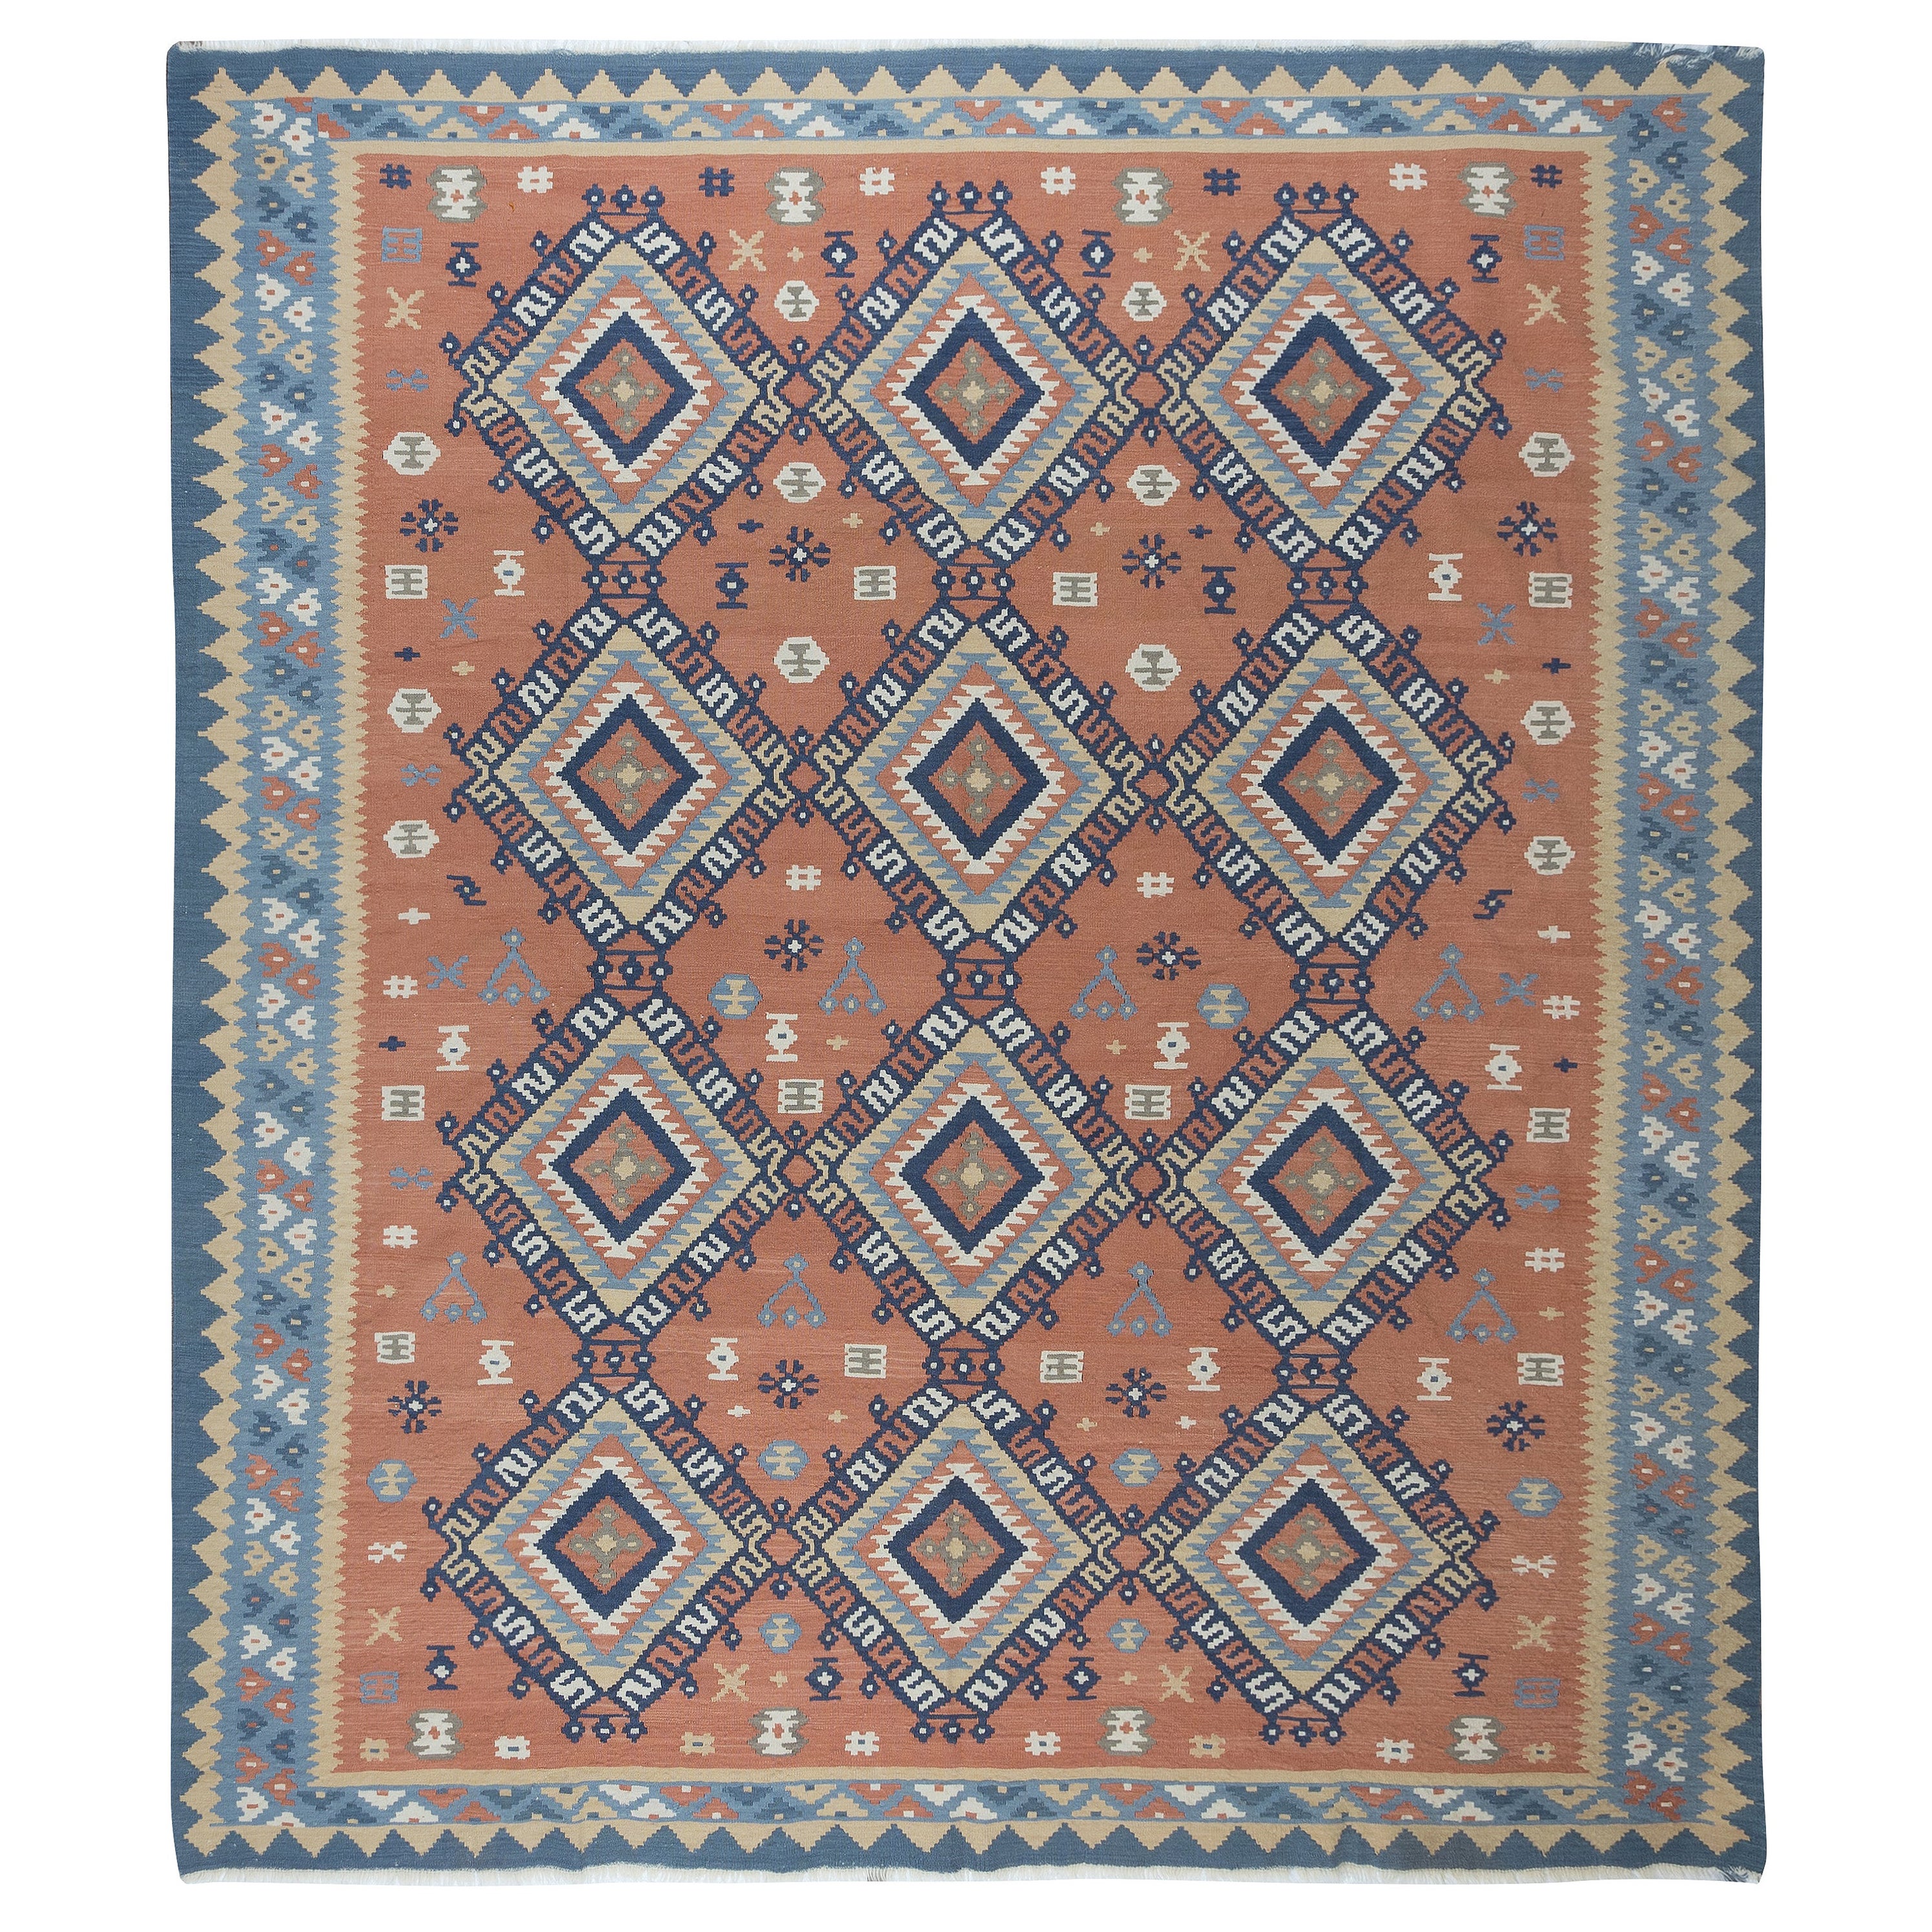 8.5x9.2 Ft Swedish Hand-Woven Vintage Wool Kilim Rug with Geometric Details For Sale